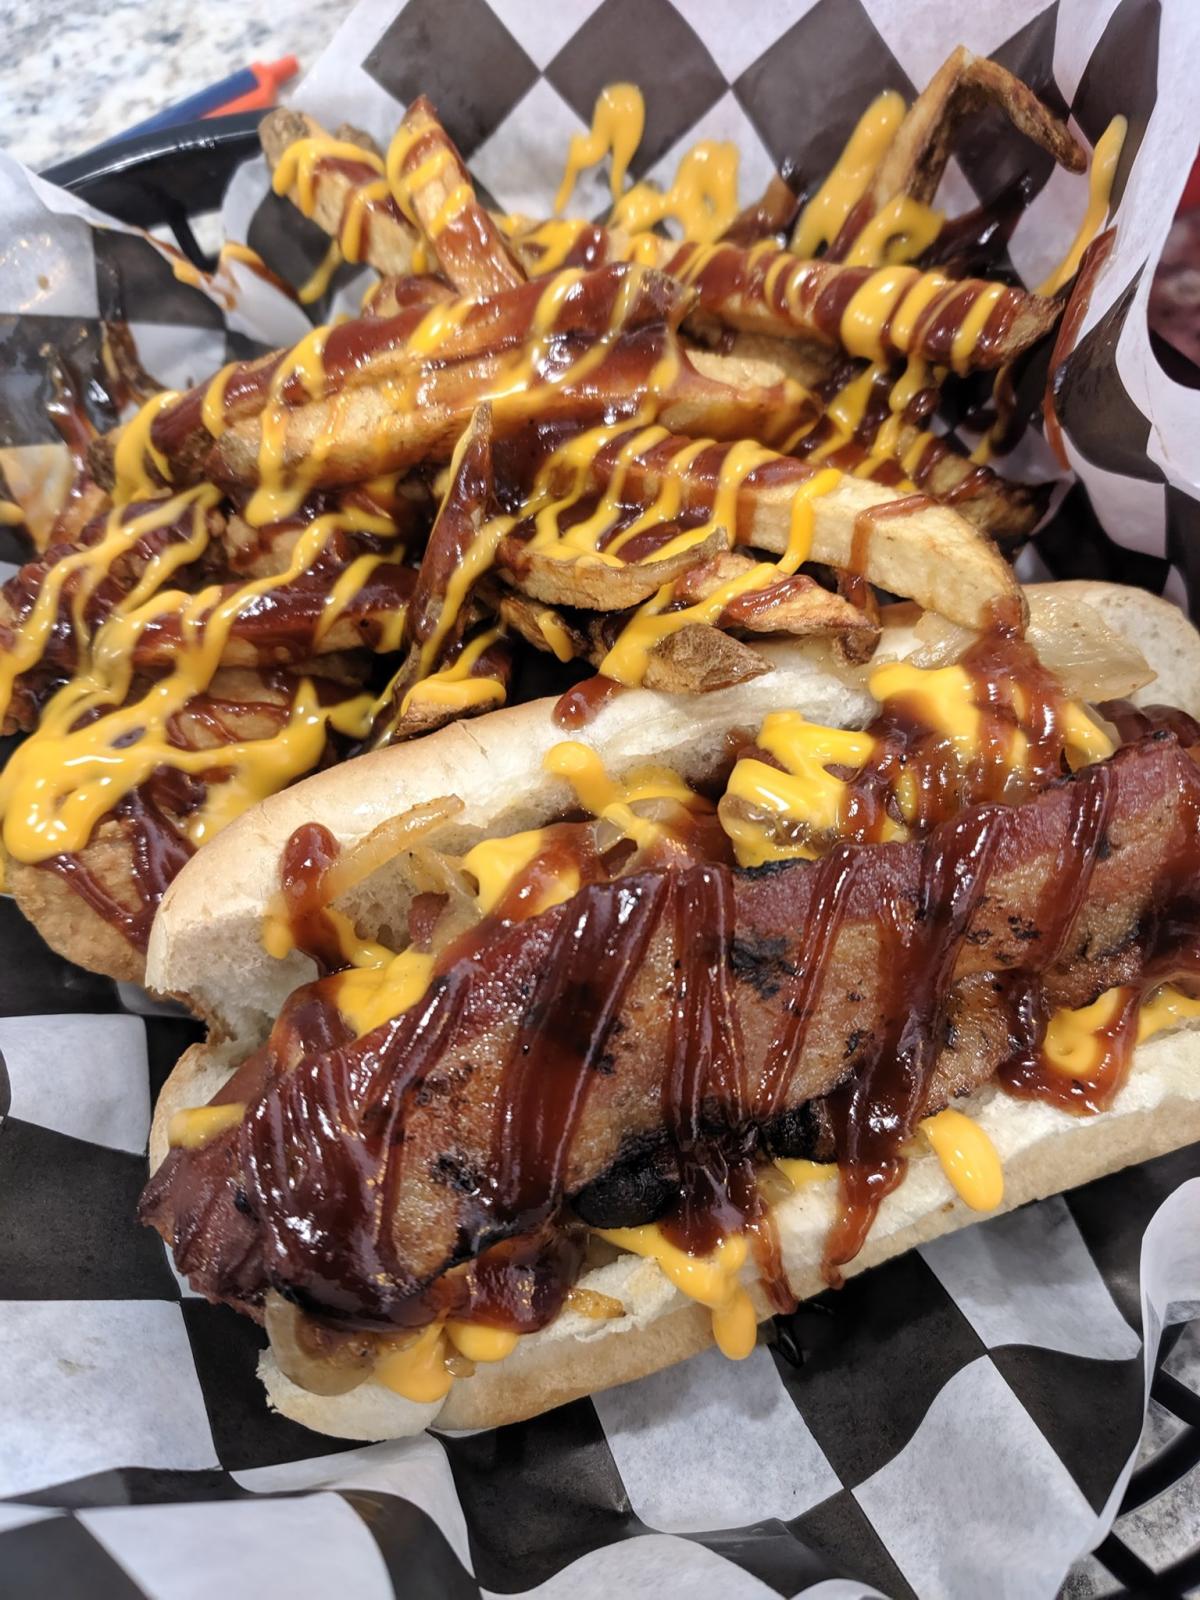 Big Ray's Burgers & Dogs | Camp Hill, PA 17011